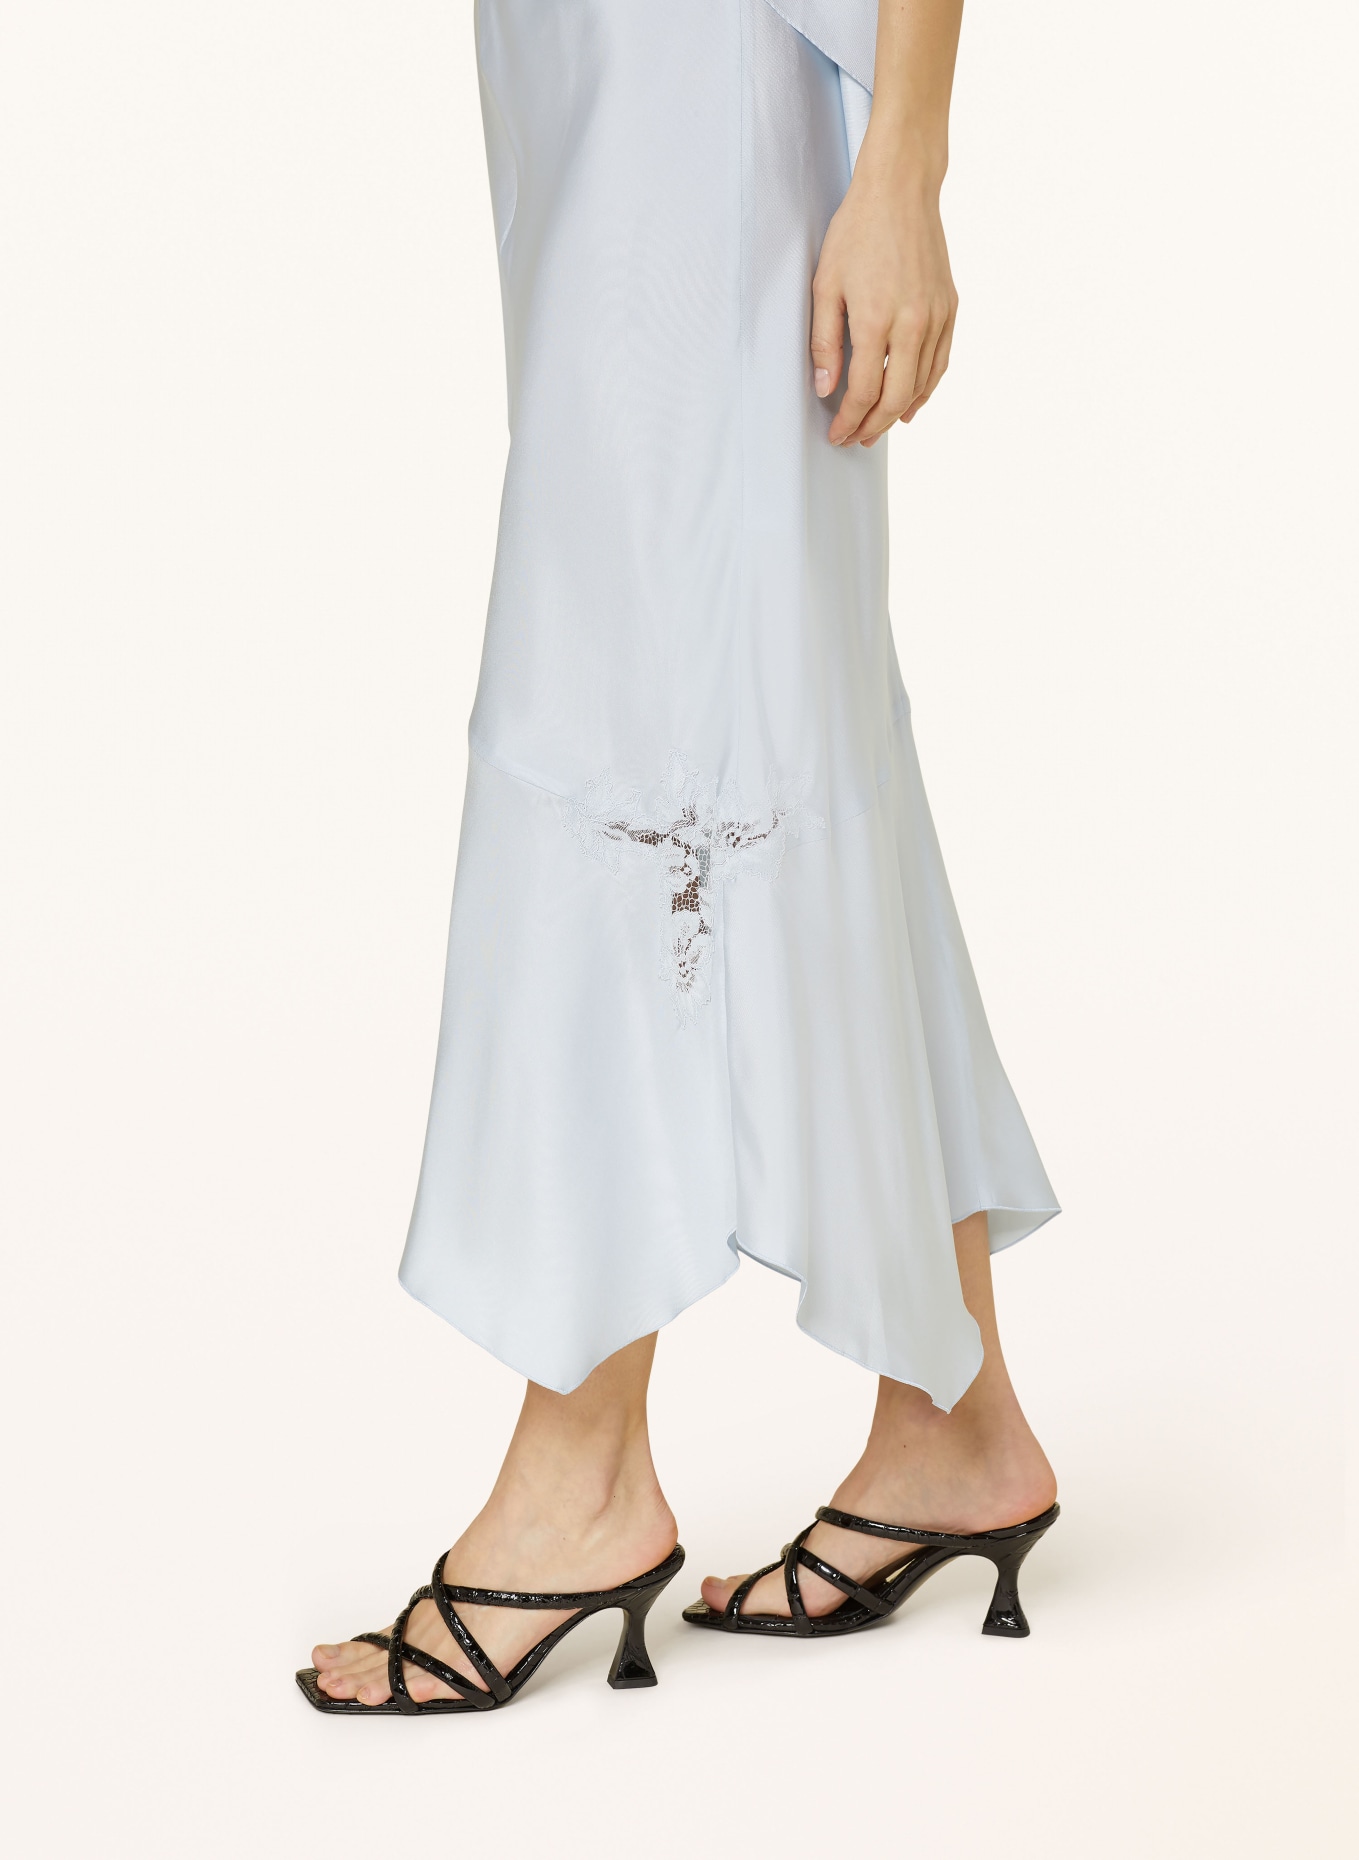 DOROTHEE SCHUMACHER Silk skirt SENSUAL COOLNESS with lace, Color: LIGHT BLUE (Image 4)